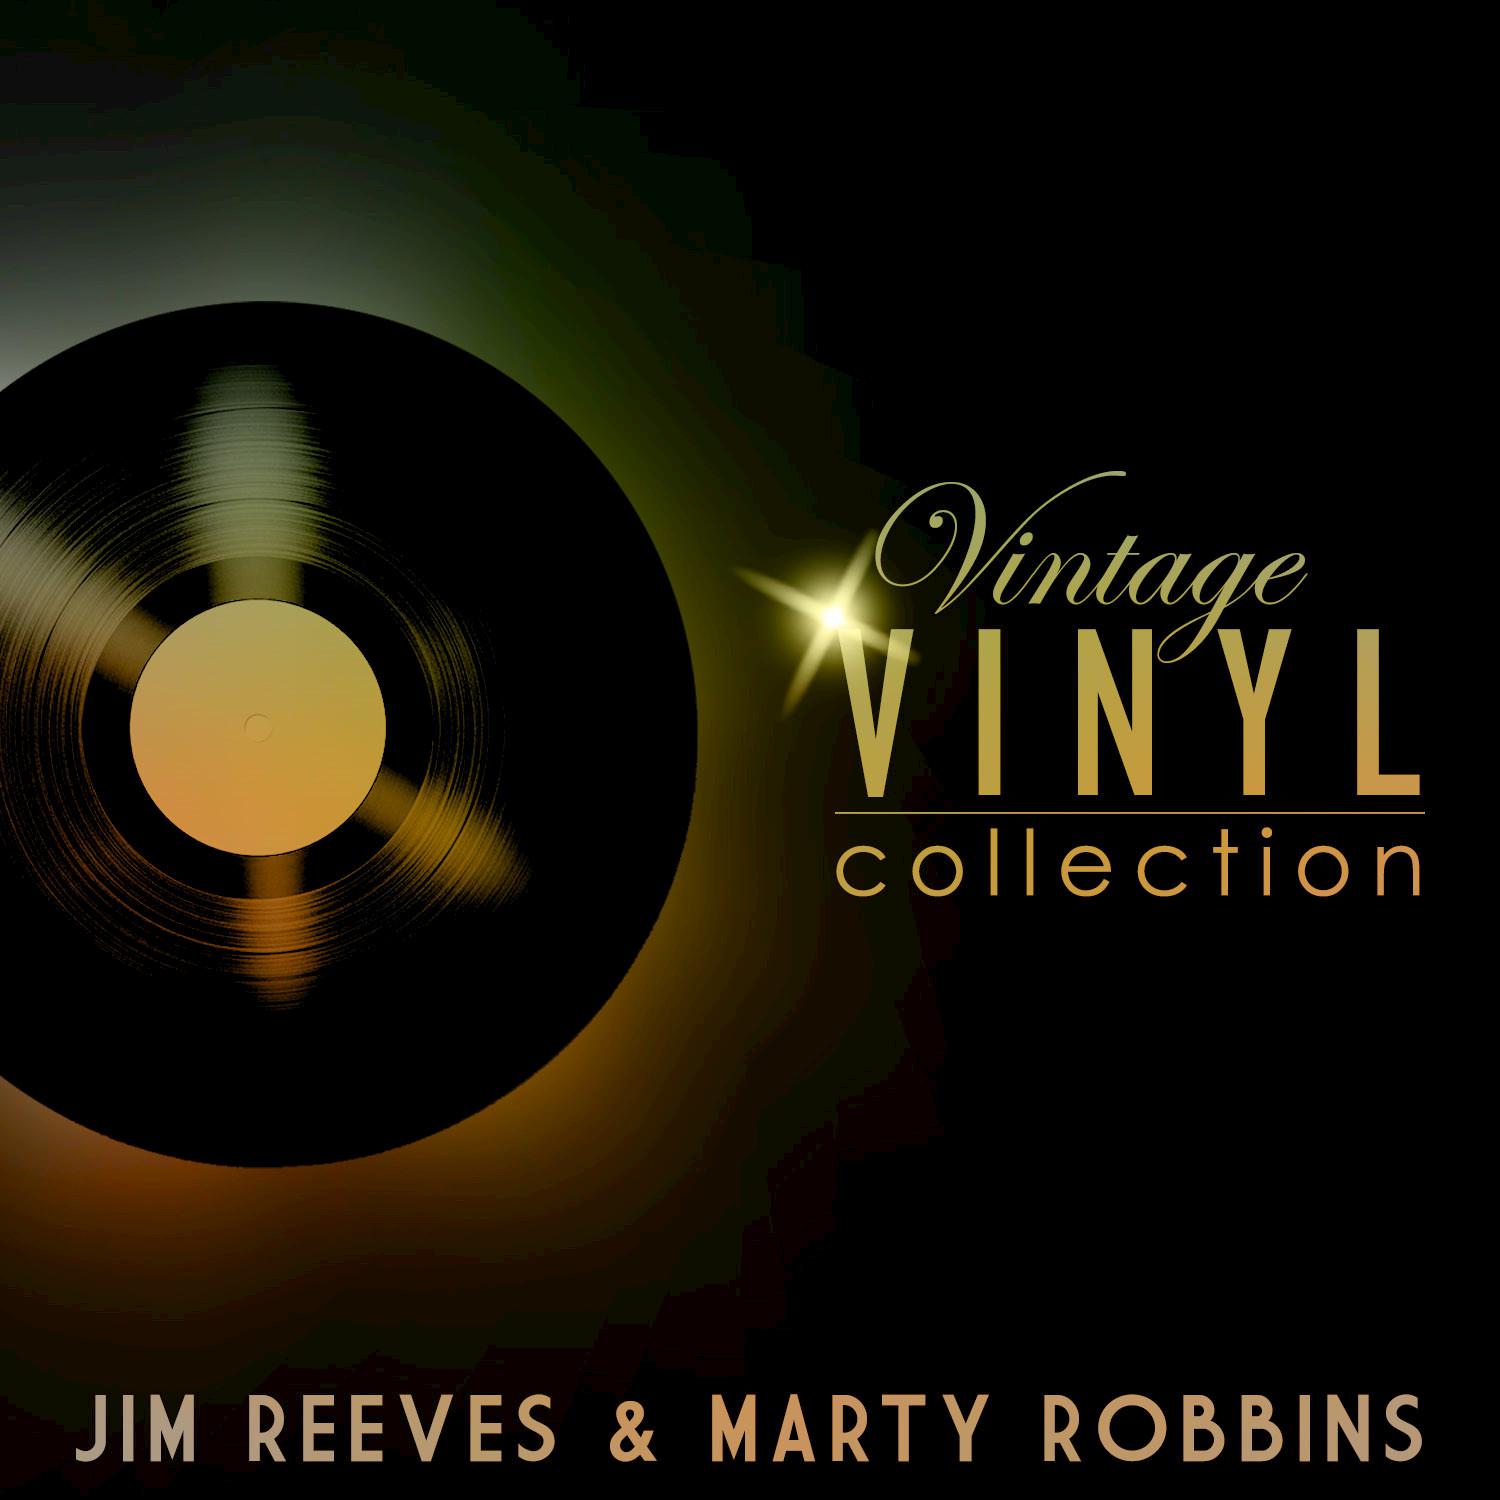 Vintage Vinyl Collection - Jim Reeves and Marty Robbins